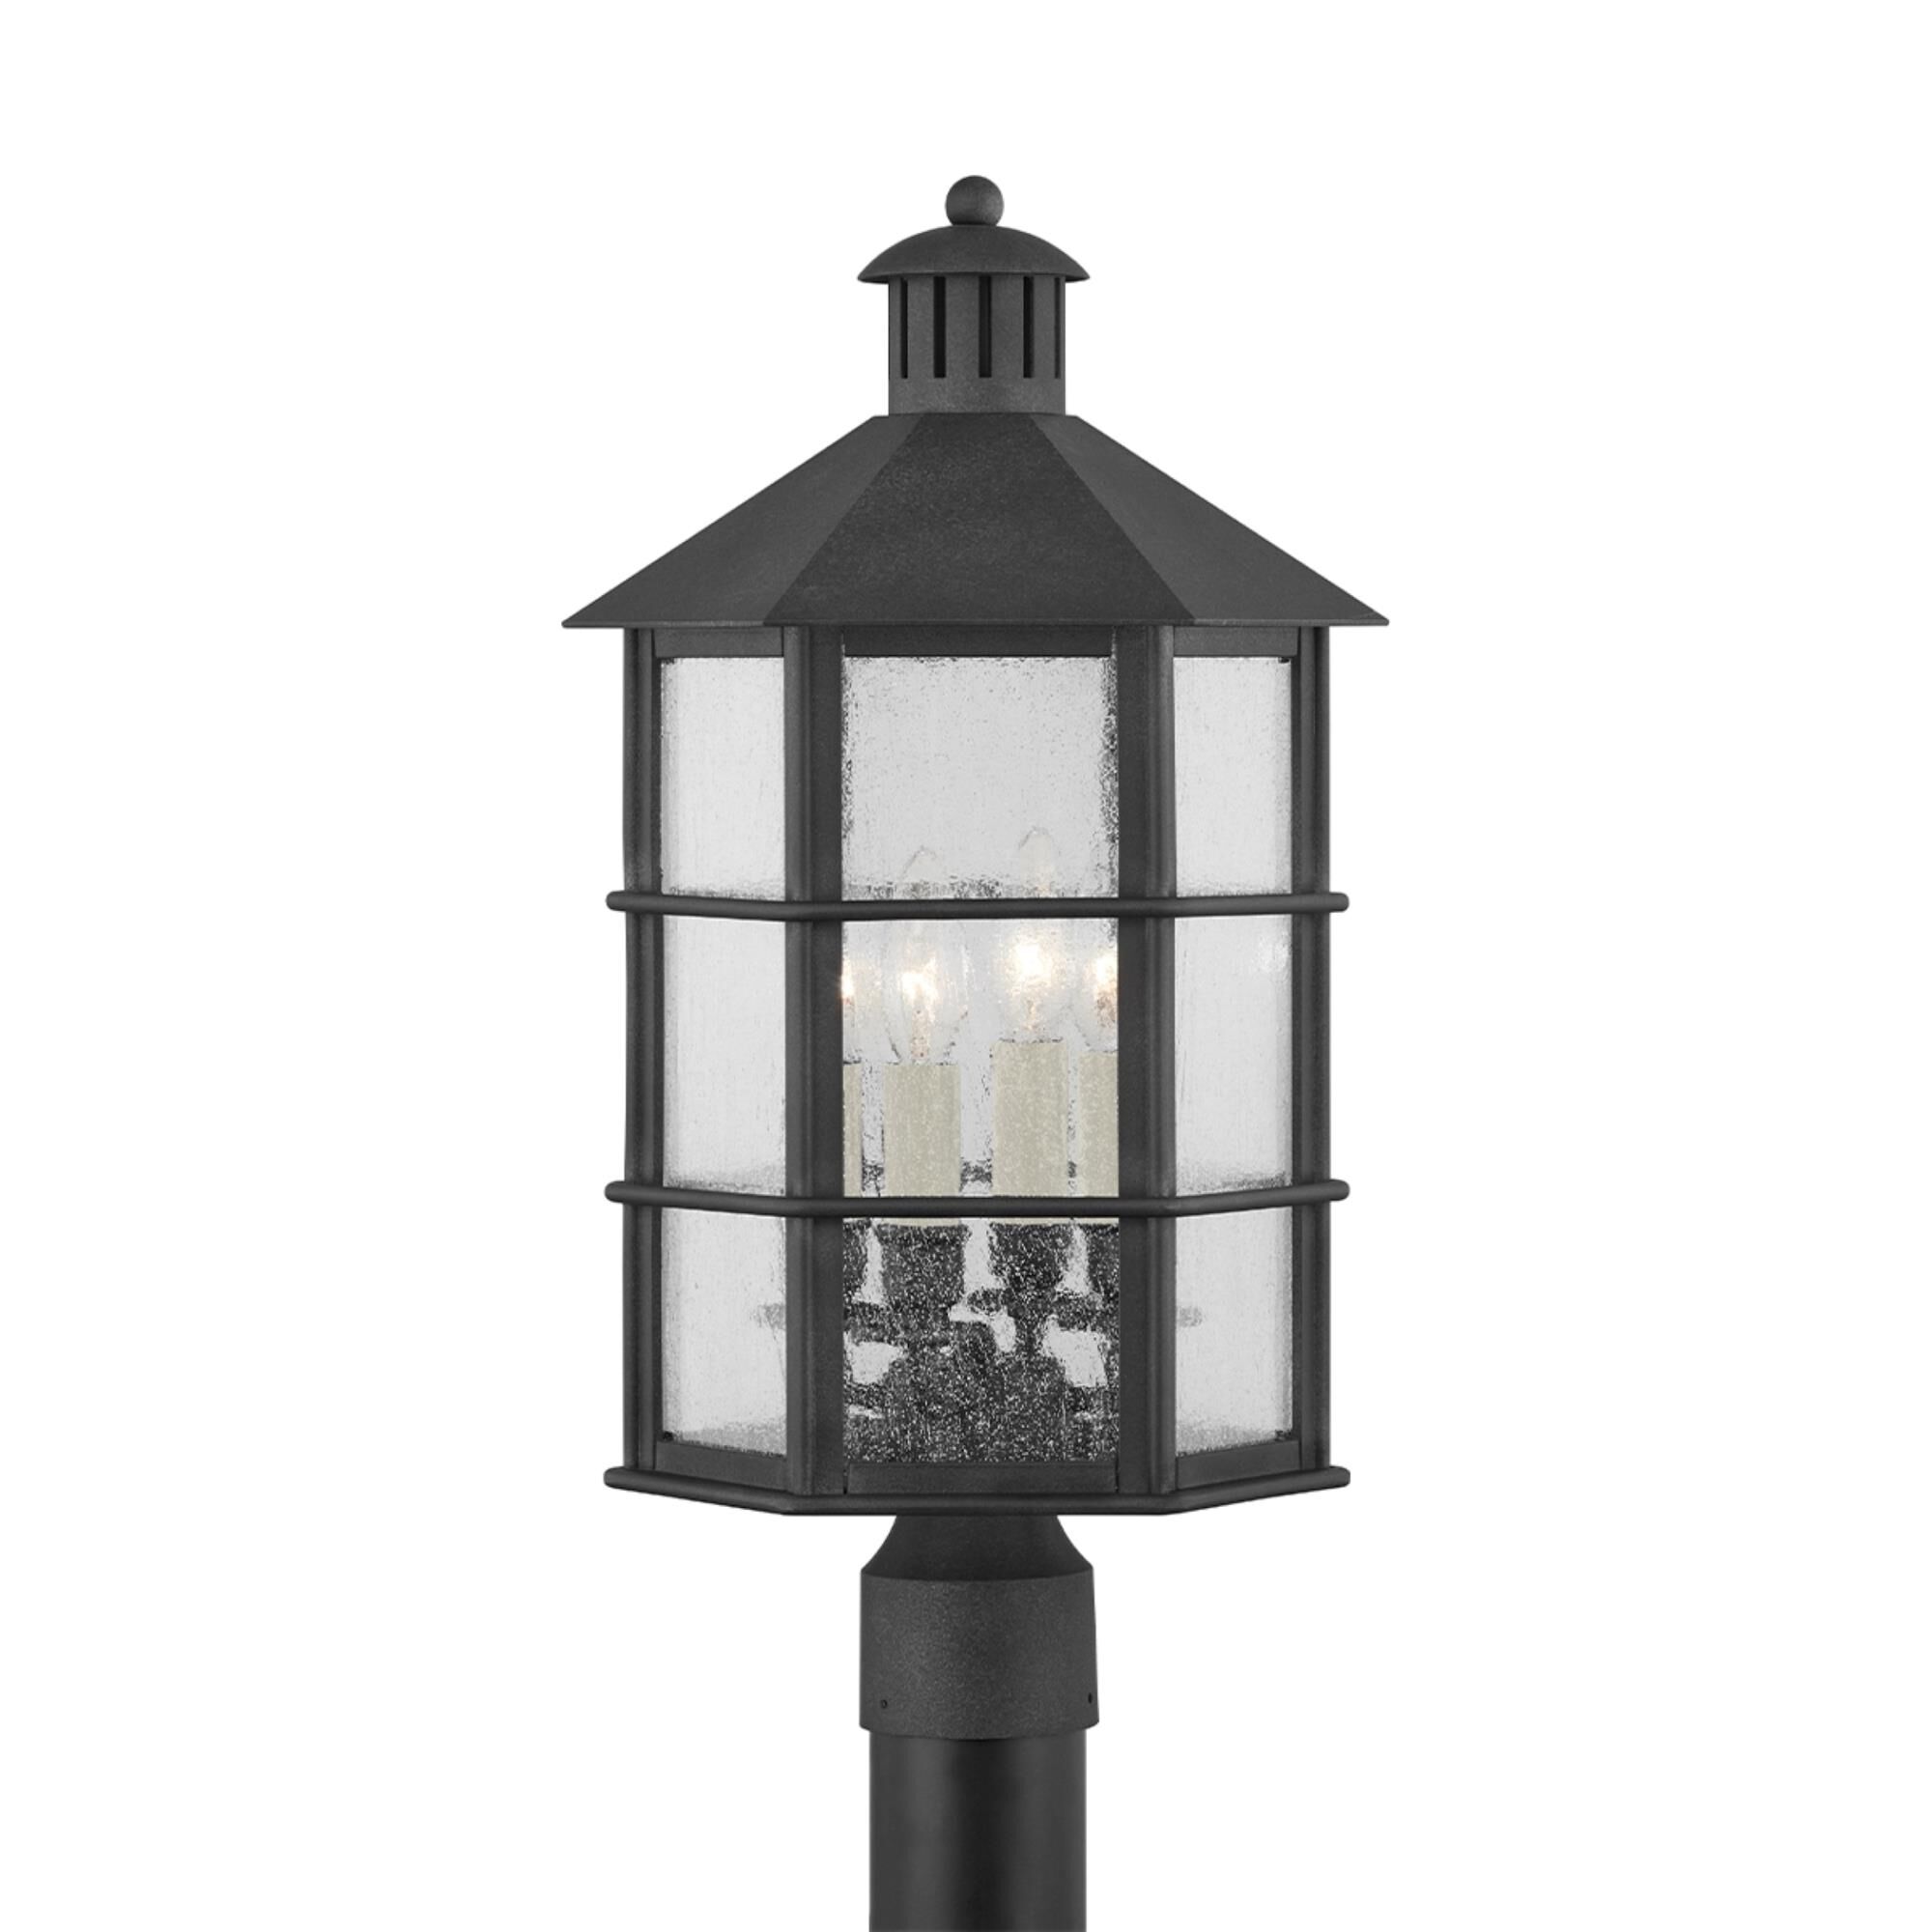 Photos - Floodlight / Street Light Troy Lighting Mark D. Sikes Lake County 11.5 Inch Outdoor Post Lamp Lake C